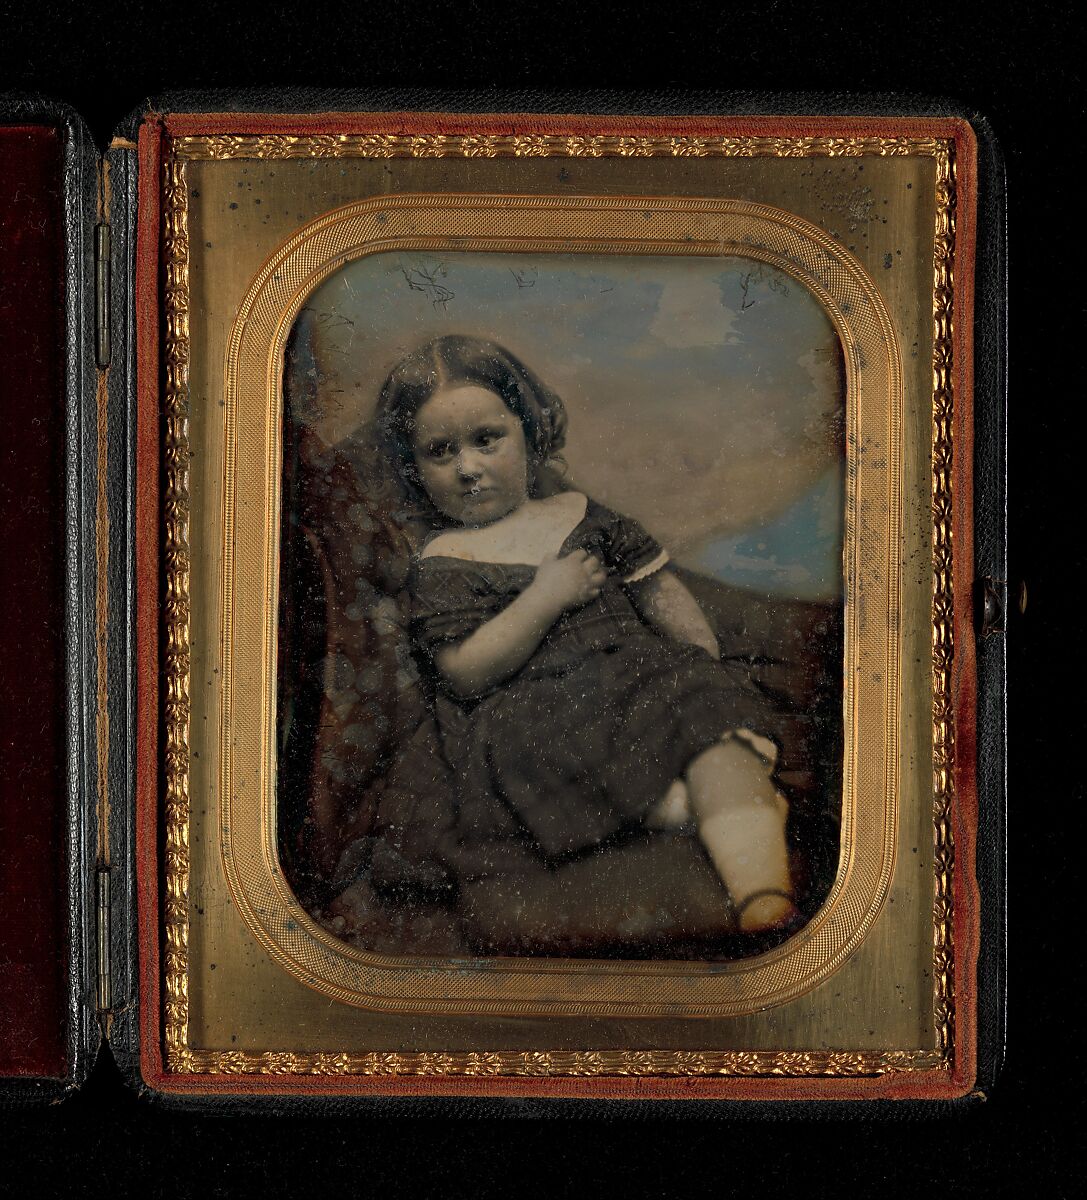 [Augusta Hawes at Four Years Old], Southworth and Hawes (American, active 1843–1863), Daguerreotype 